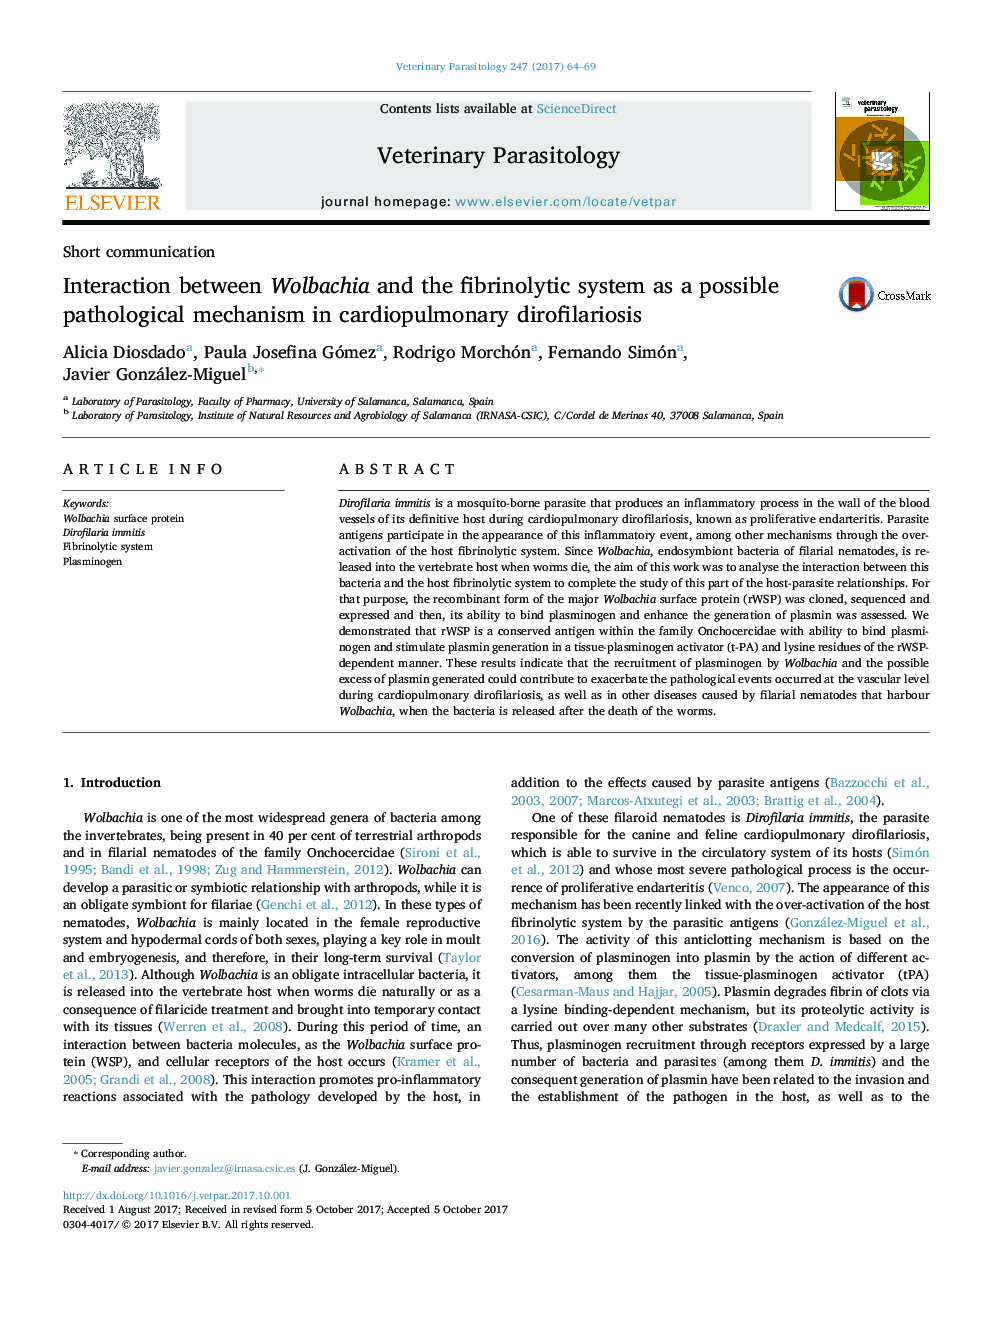 Interaction between Wolbachia and the fibrinolytic system as a possible pathological mechanism in cardiopulmonary dirofilariosis